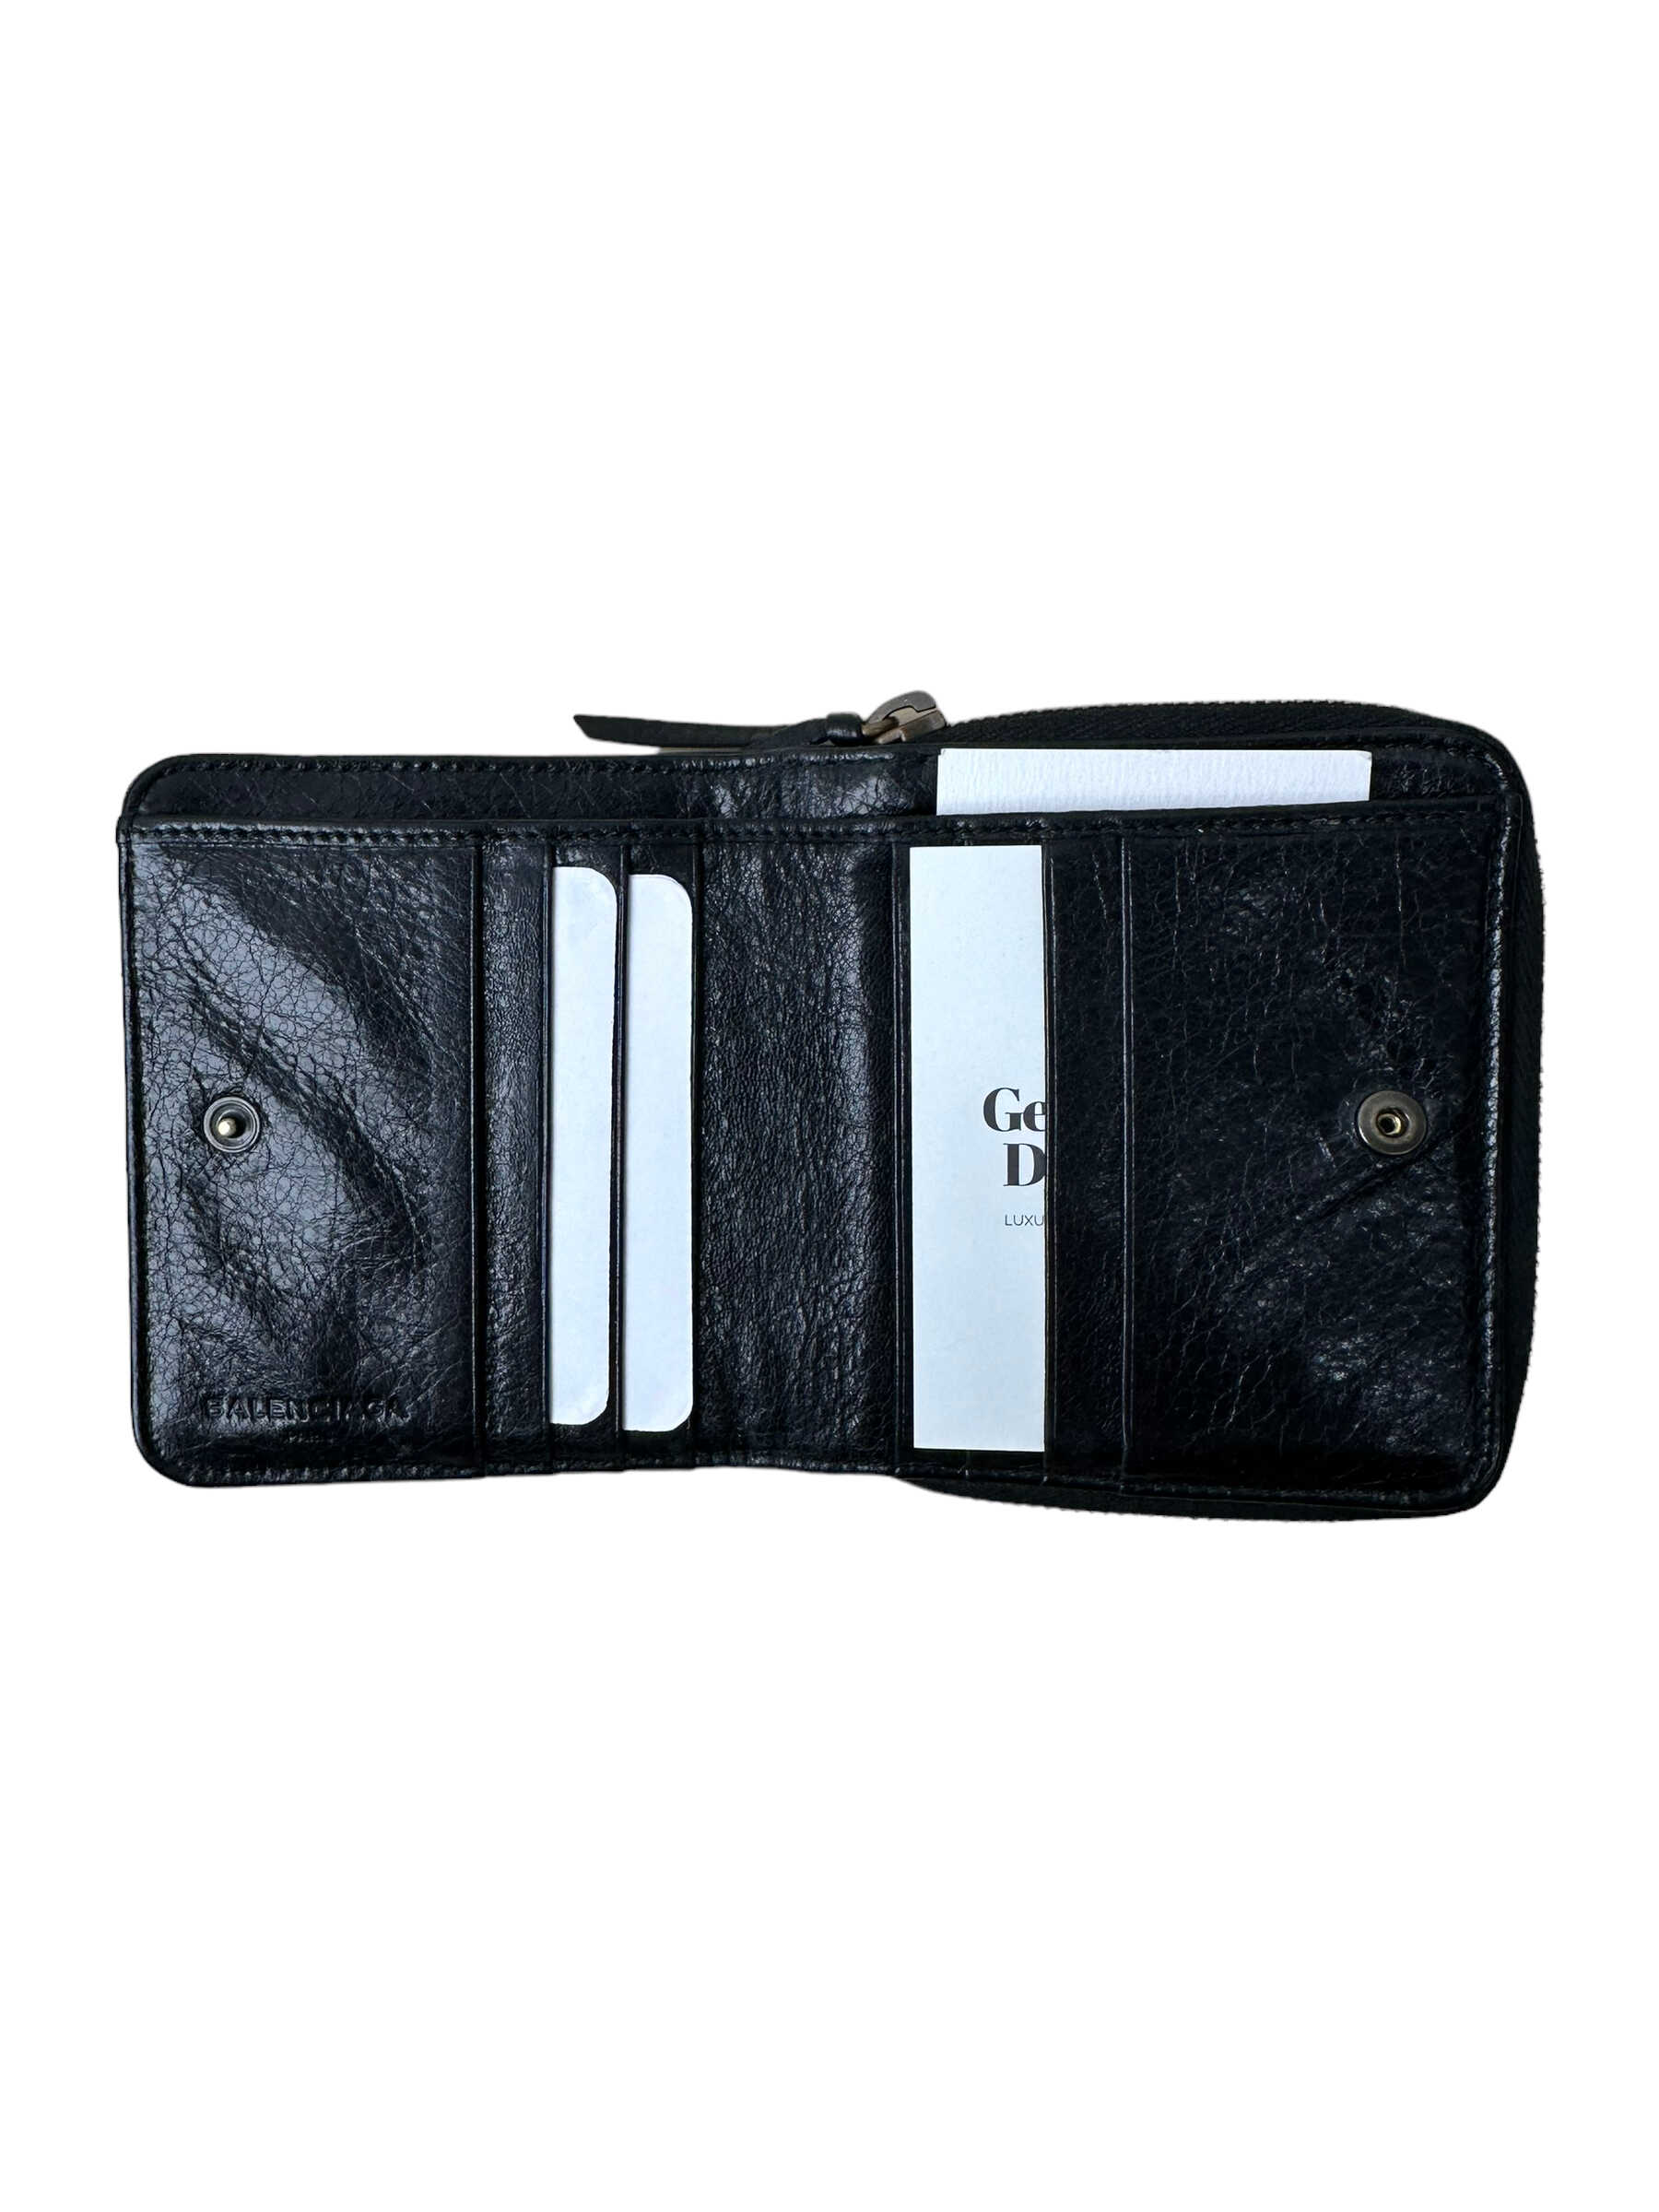 Balenciaga Black Leather Motocross Zip Around Compact Wallet— Genuine Design Luxury Consignment for Men. New & Pre-Owned Clothing, Shoes, & Accessories. Calgary, Canada